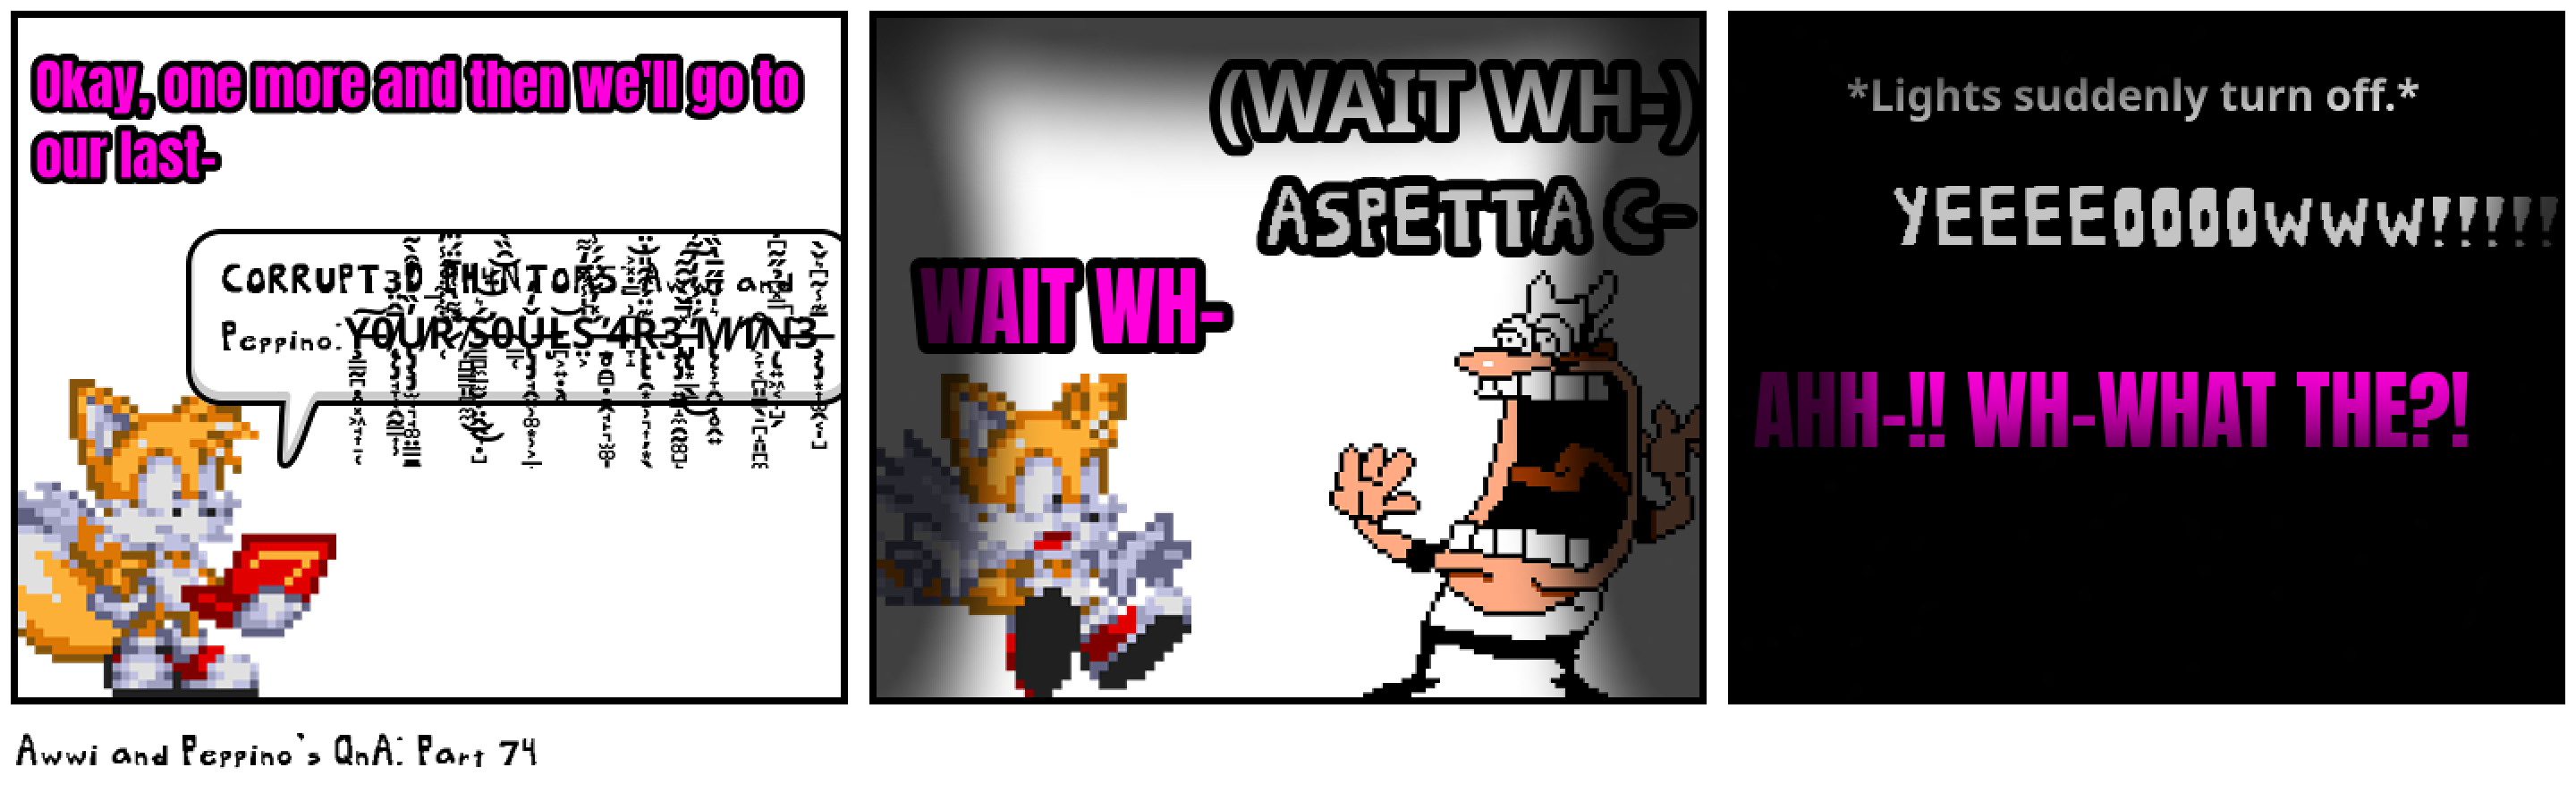 Awwi and Peppino's QnA: Part 74